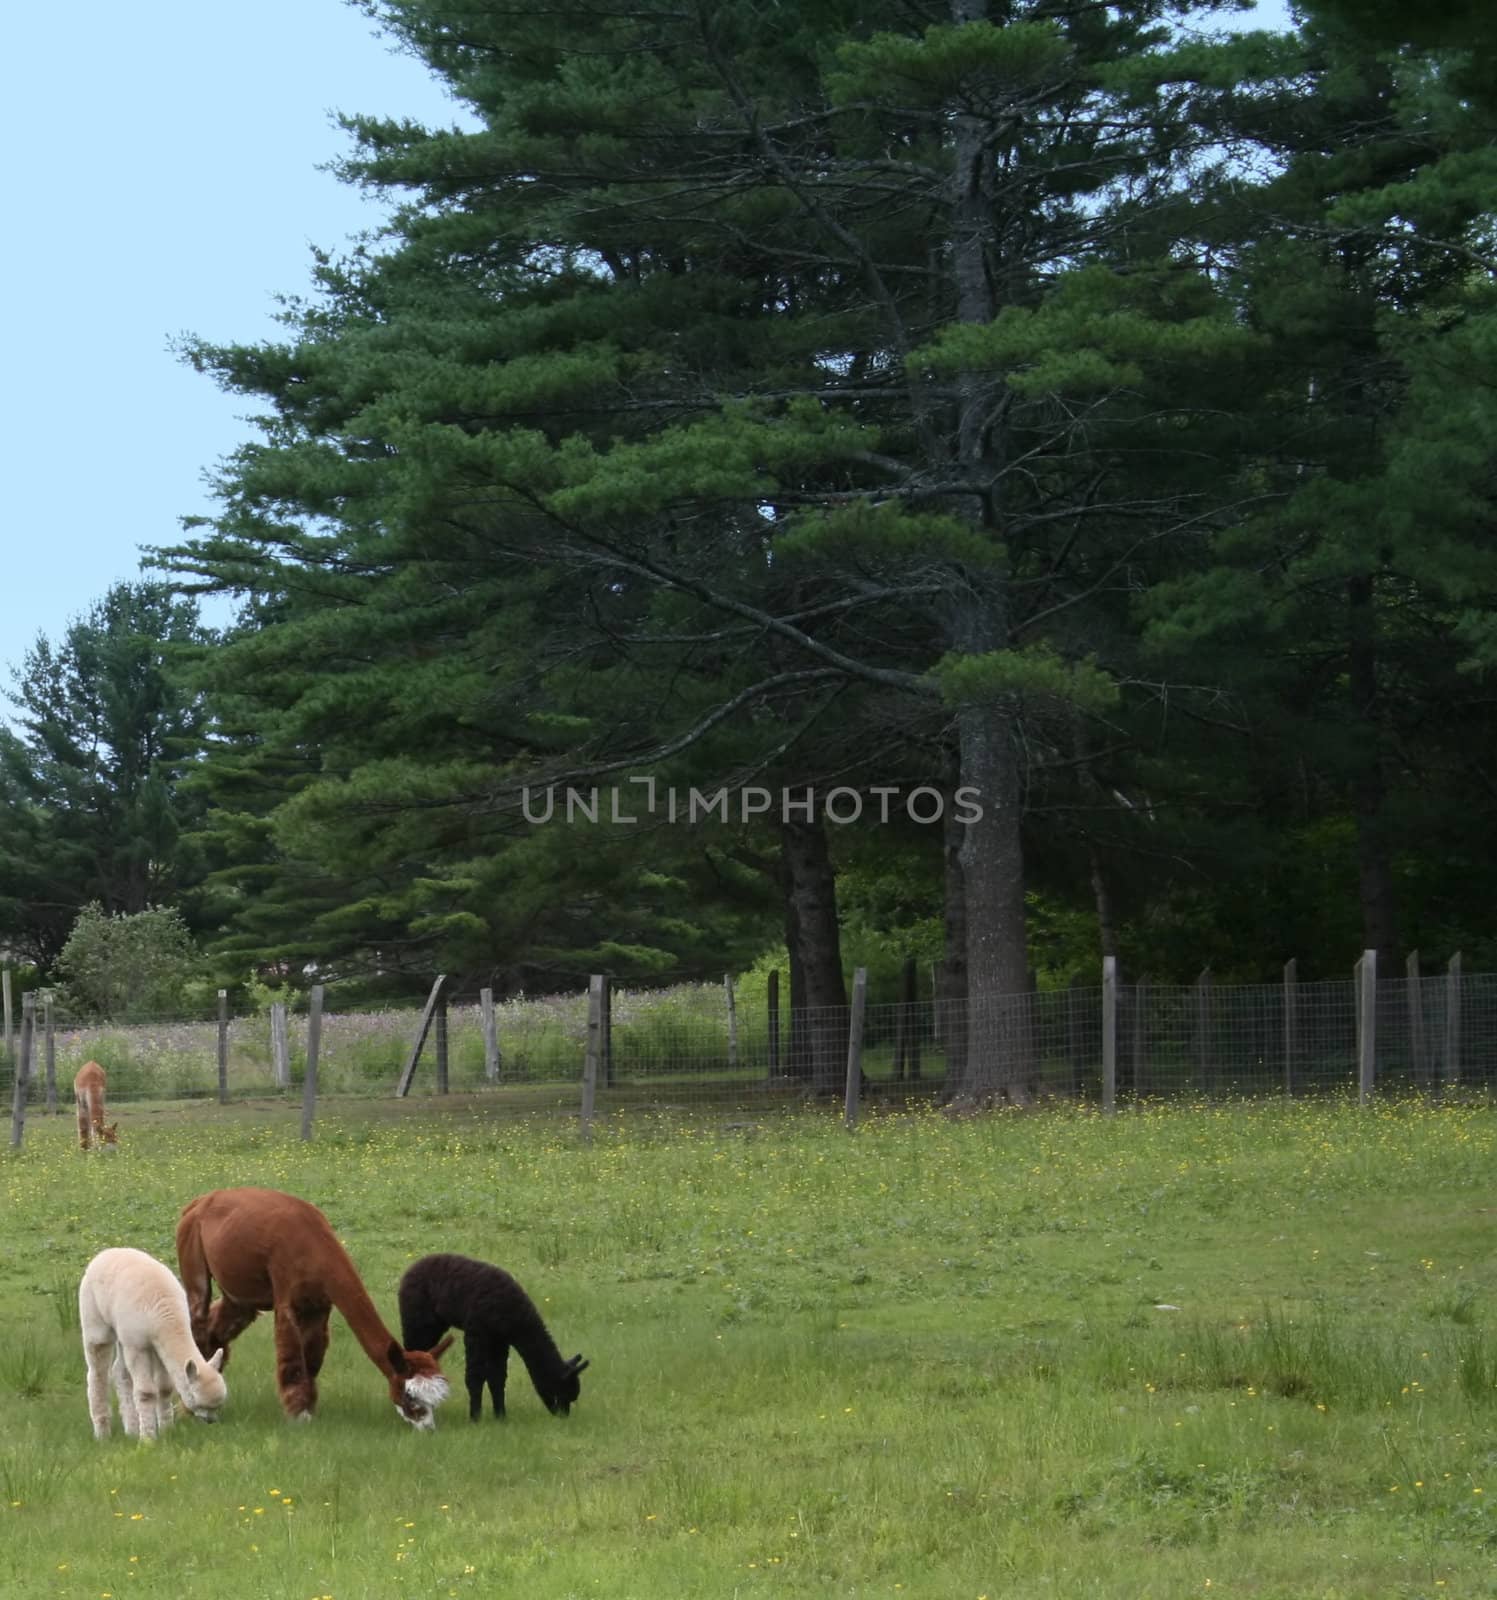 a brown alpaca adult female, with two baby crias in black and white, grazing in a field